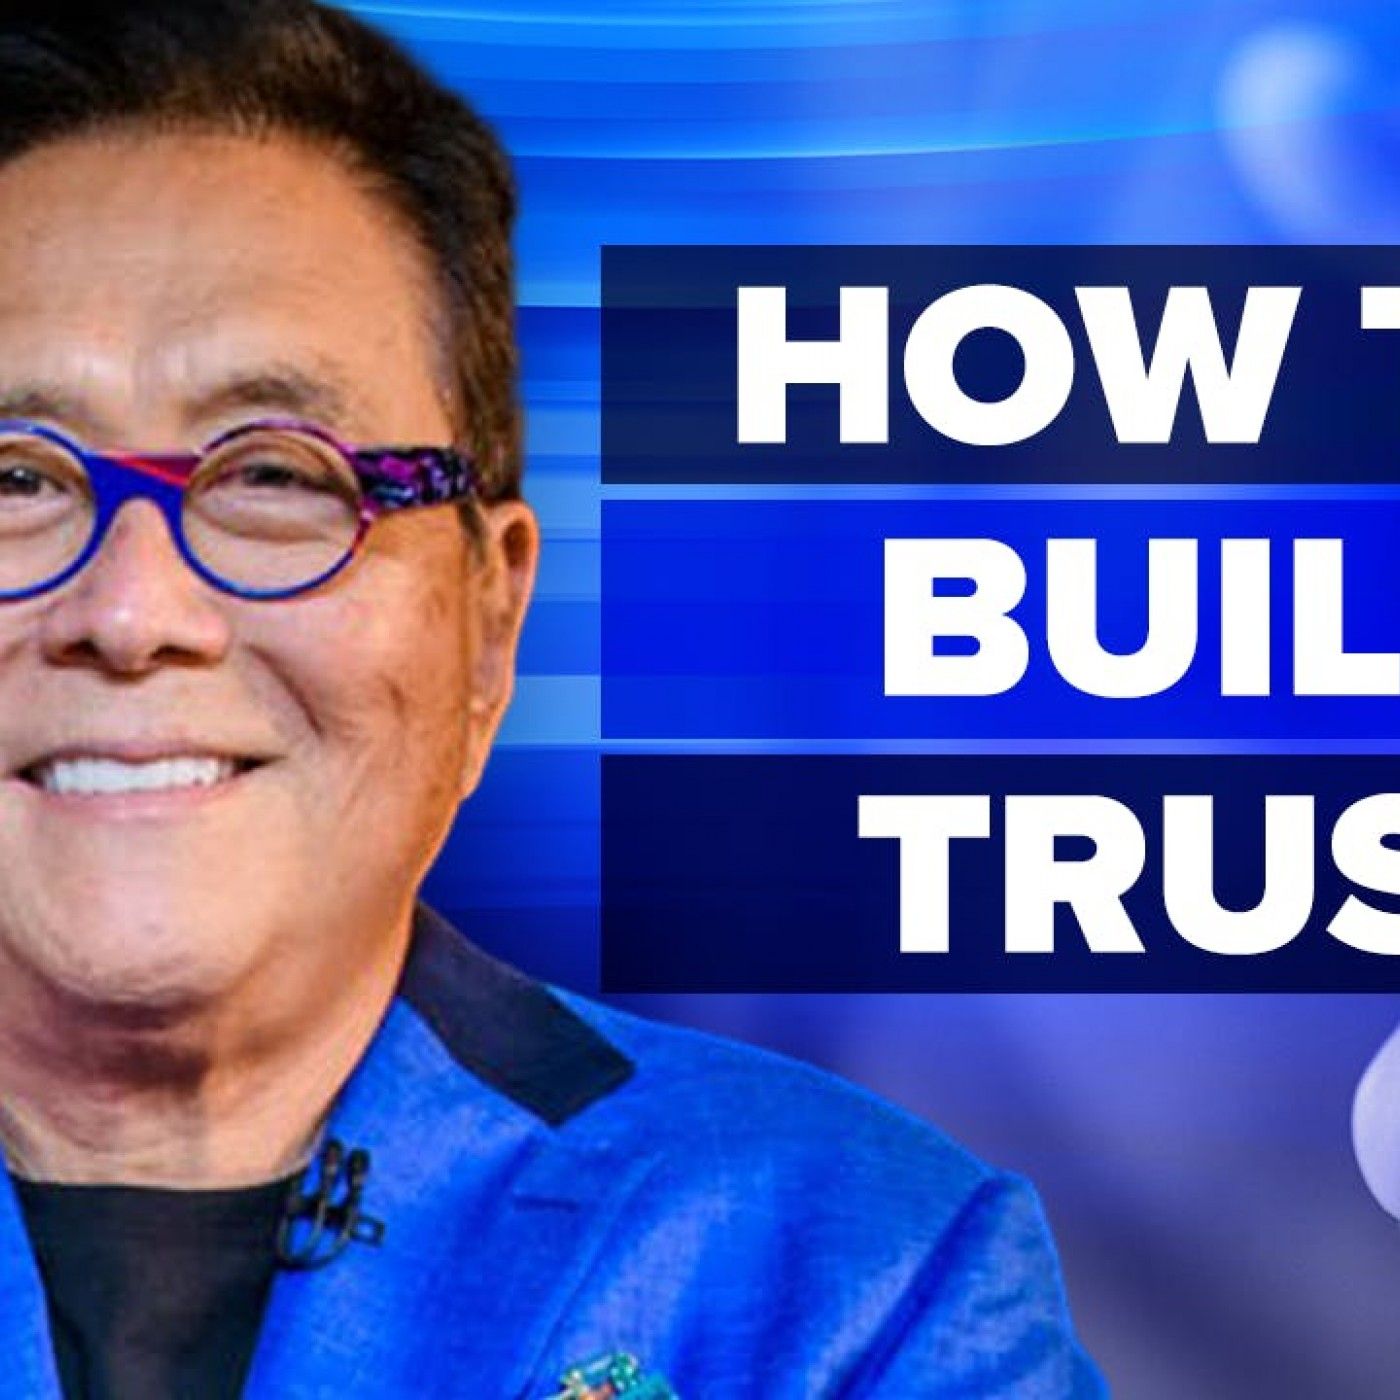 How to Build Trust - Featuring Robert Kiyosaki with special guest Joel Peterson